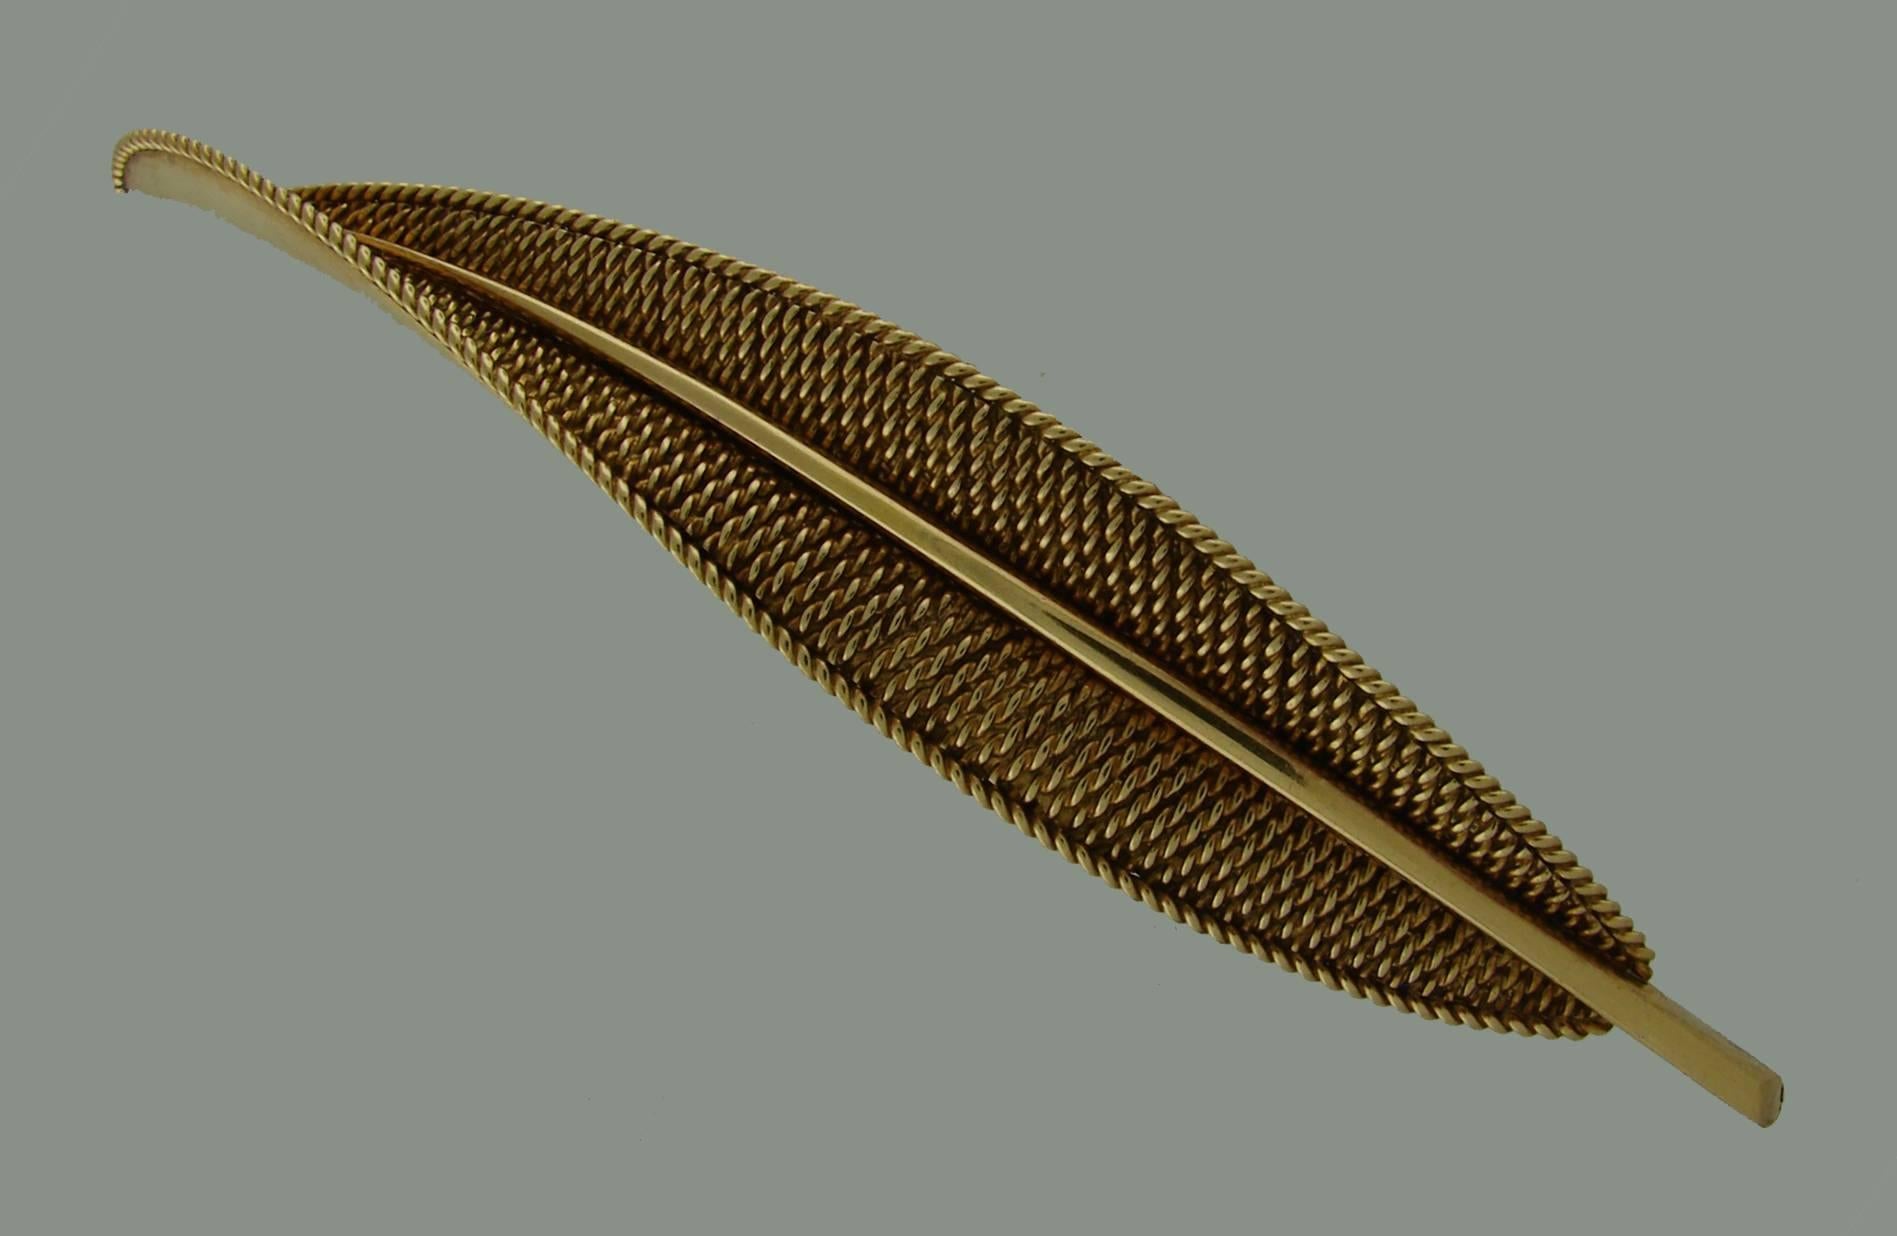 French chic leaf clip created by an exquisite Jewelry House Pierre Sterle in Paris in the 1950's. Perfect proportions, gracious lines and beautiful texture are the highlights of this classy pin. Elegant, timeless and wearable, the brooch is a great